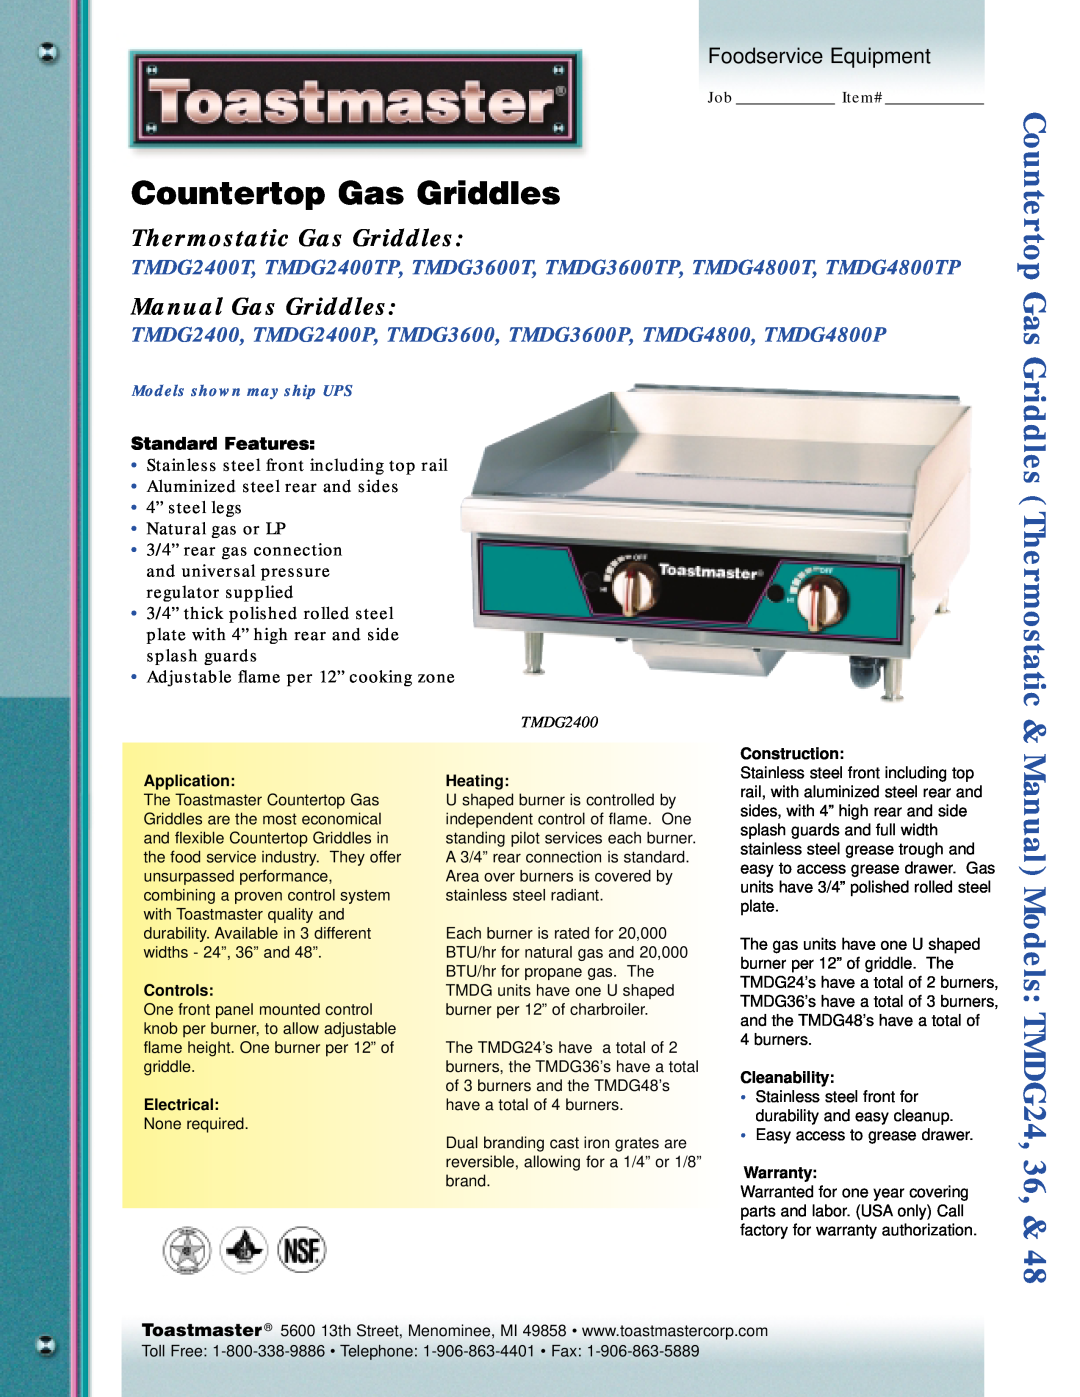 Toastmaster TMDG2400P warranty Countertop Gas Griddles Thermostatic, Manual Models TMDG24, Thermostatic Gas Griddles 